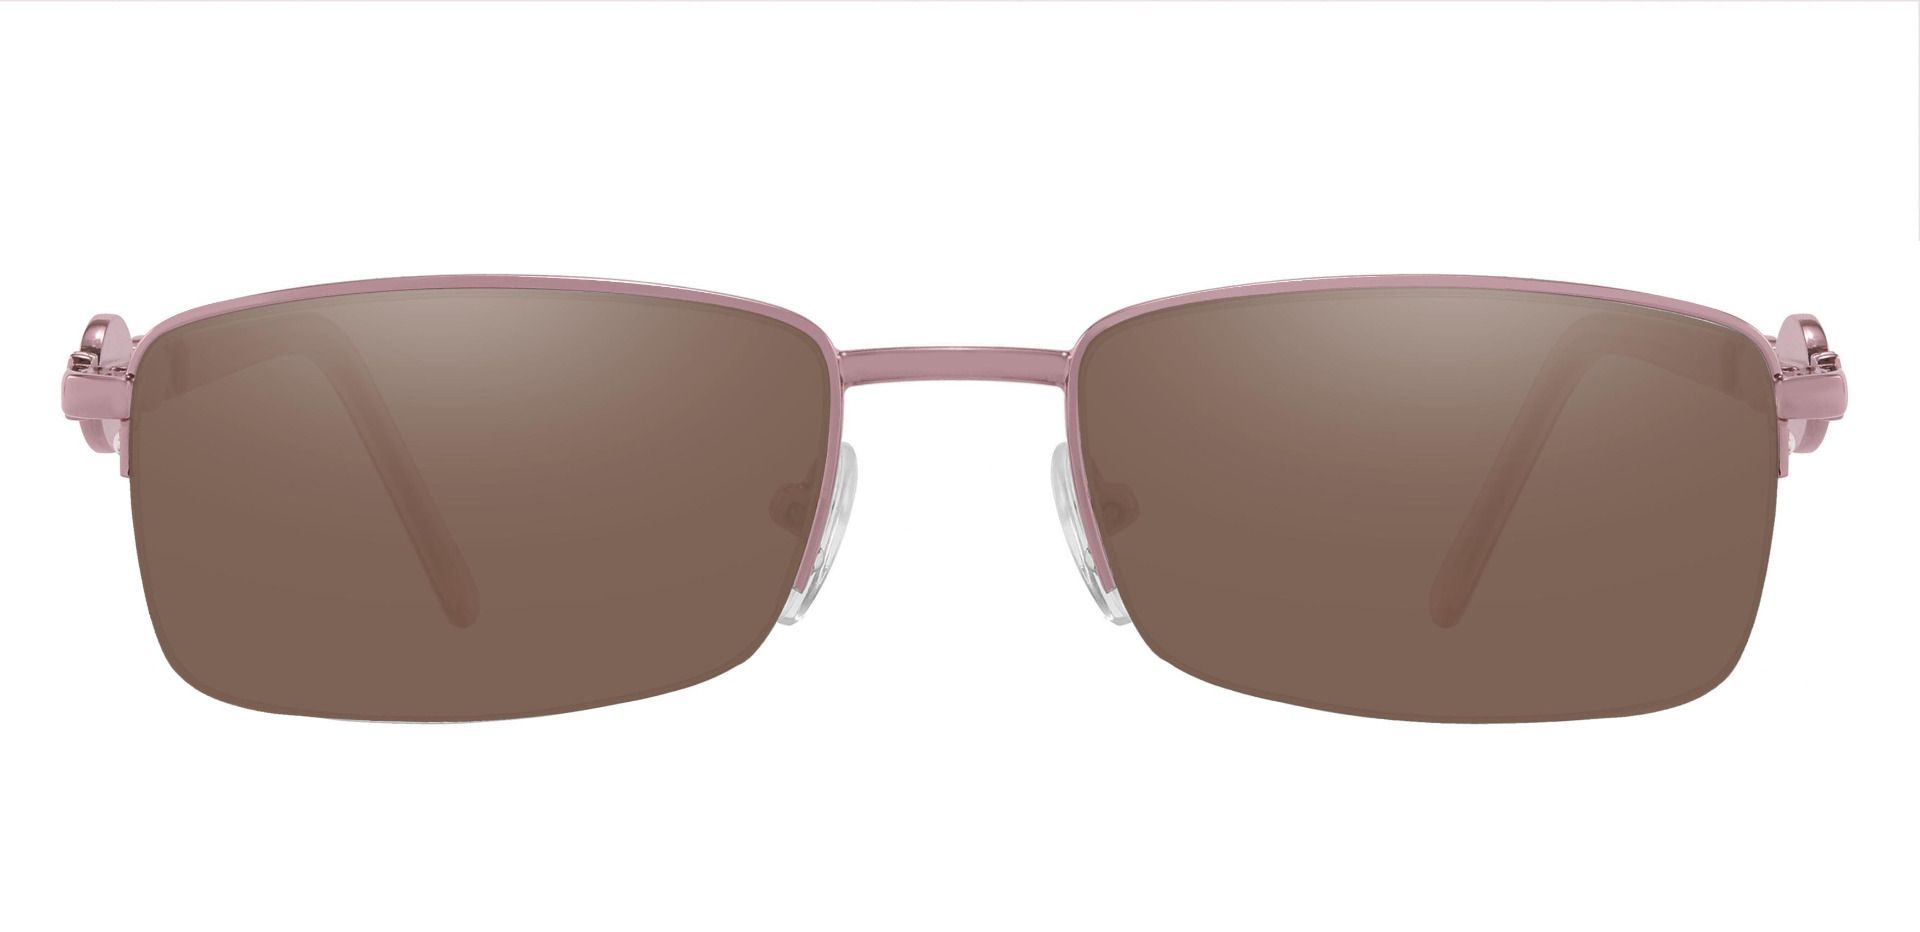 Crowley Rectangle Progressive Sunglasses - Pink Frame With Brown Lenses